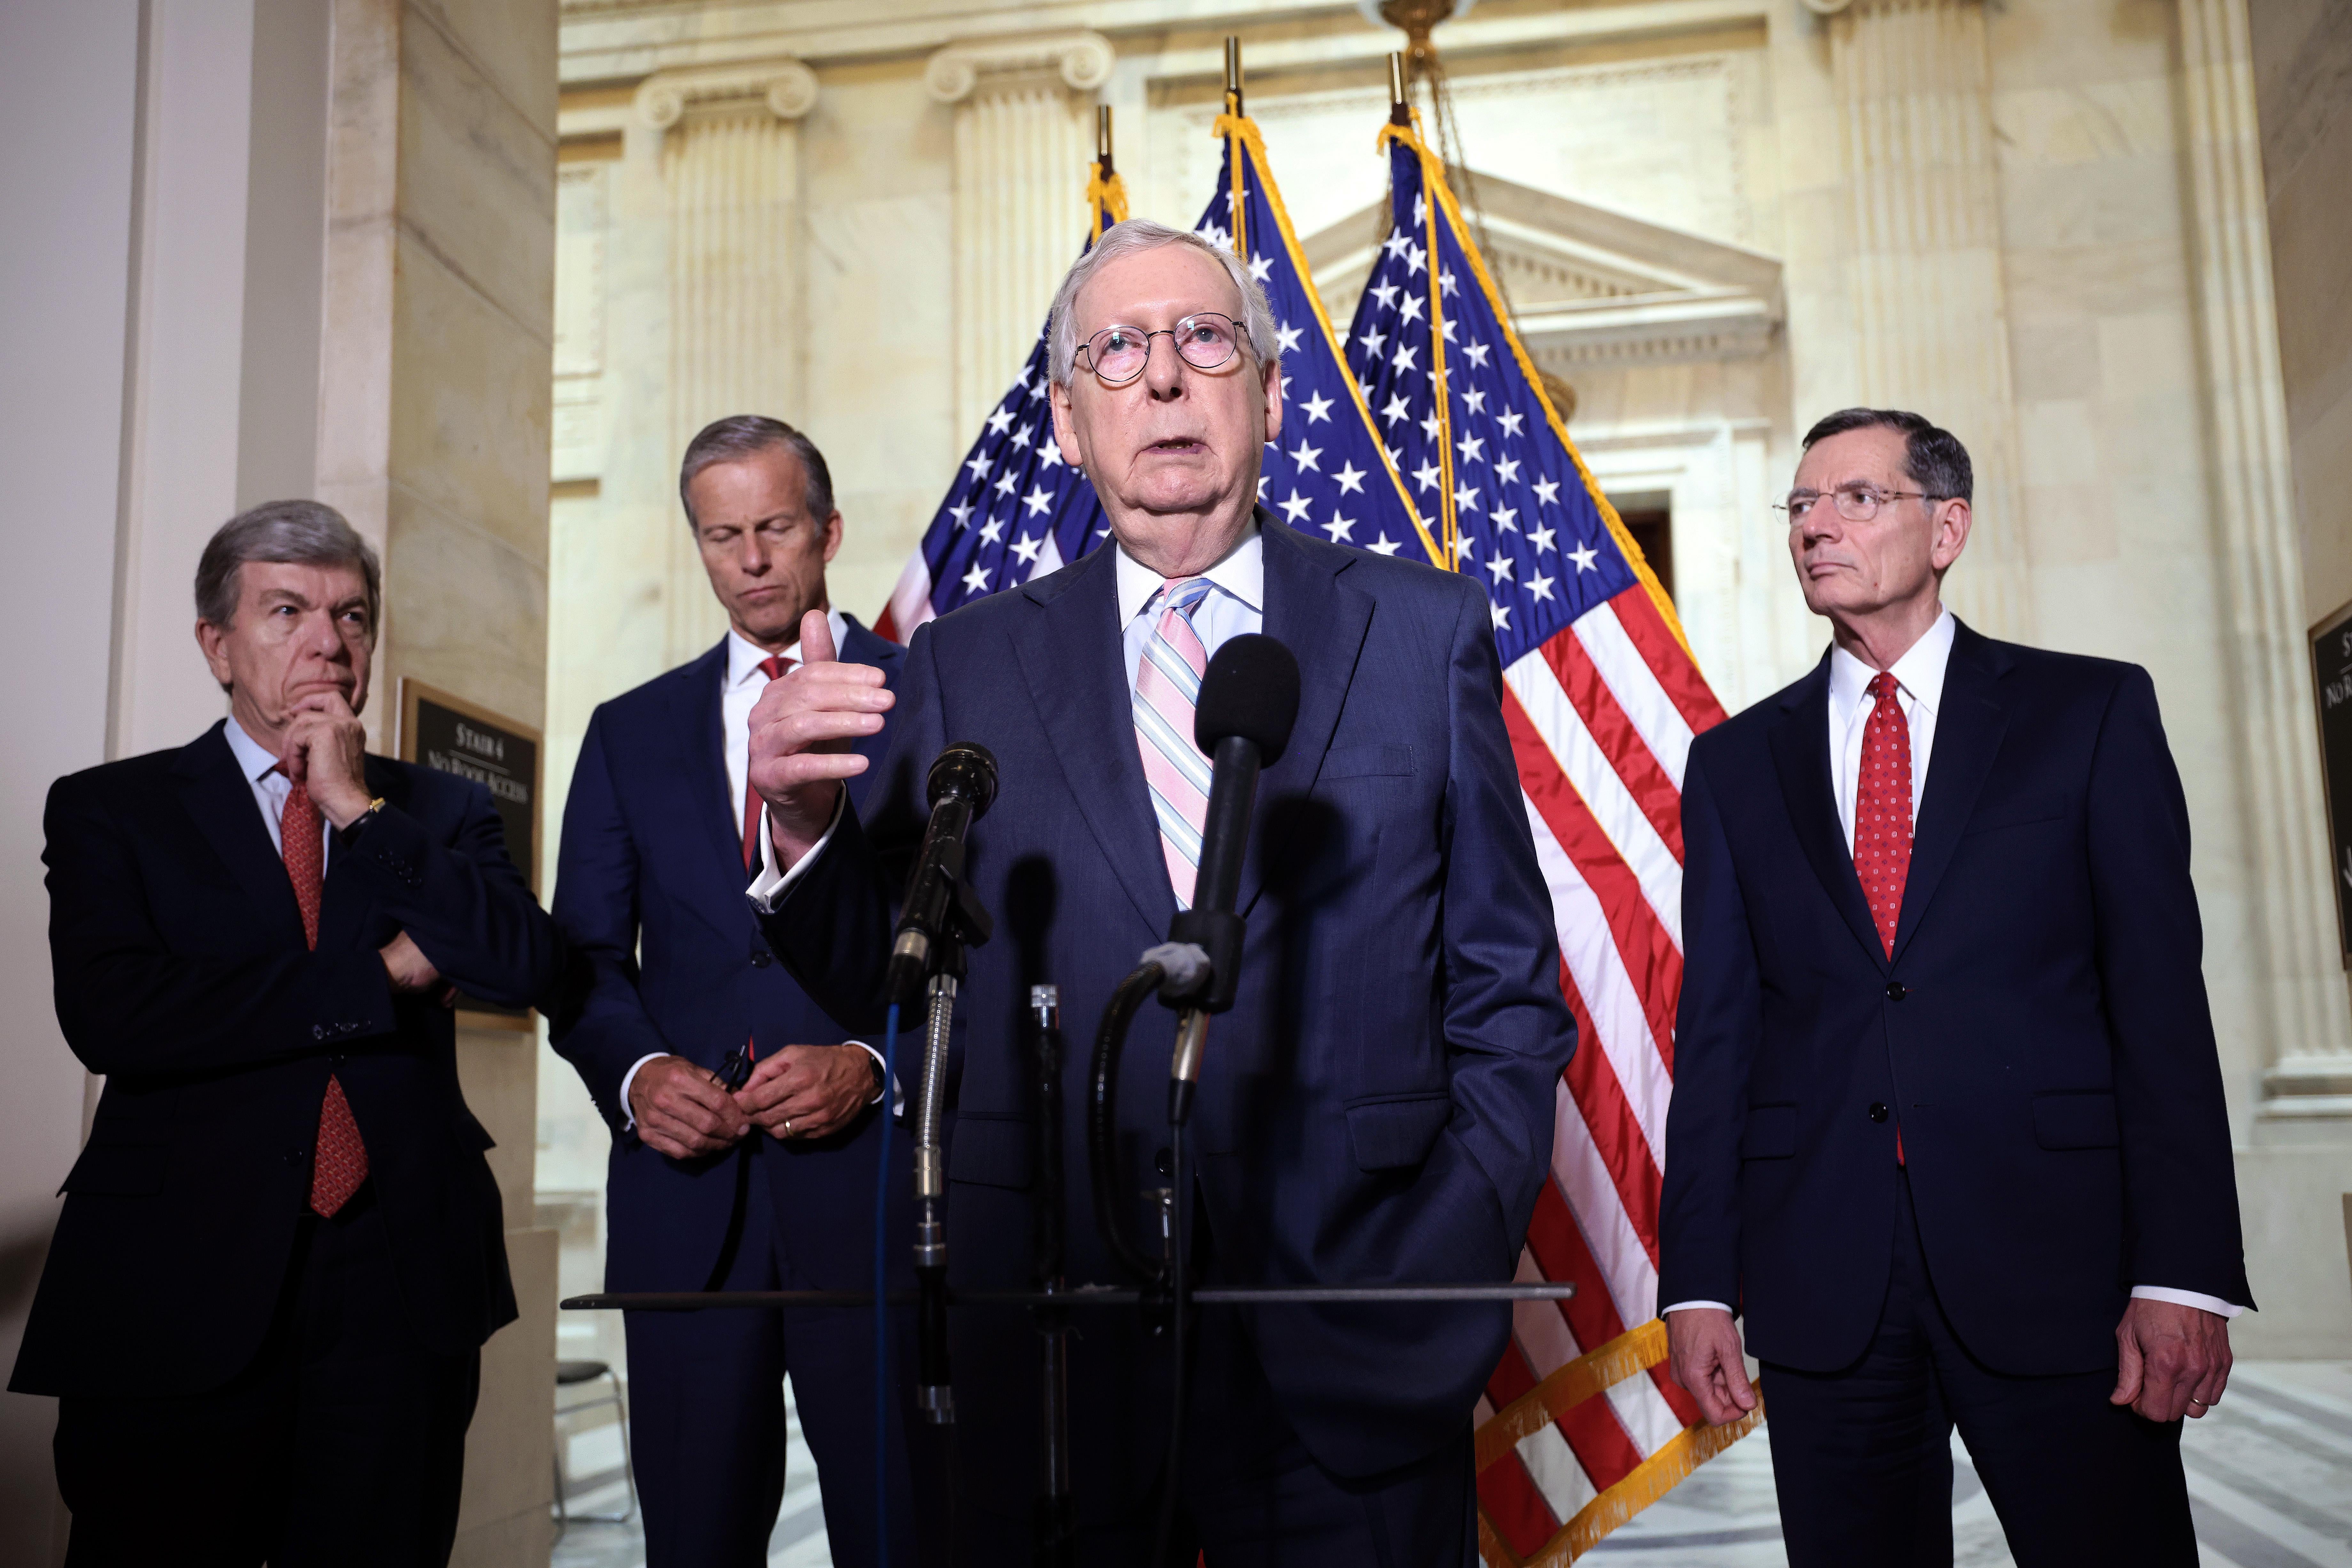 Mitch McConnell speaks at a mic with three other Republicans behind him